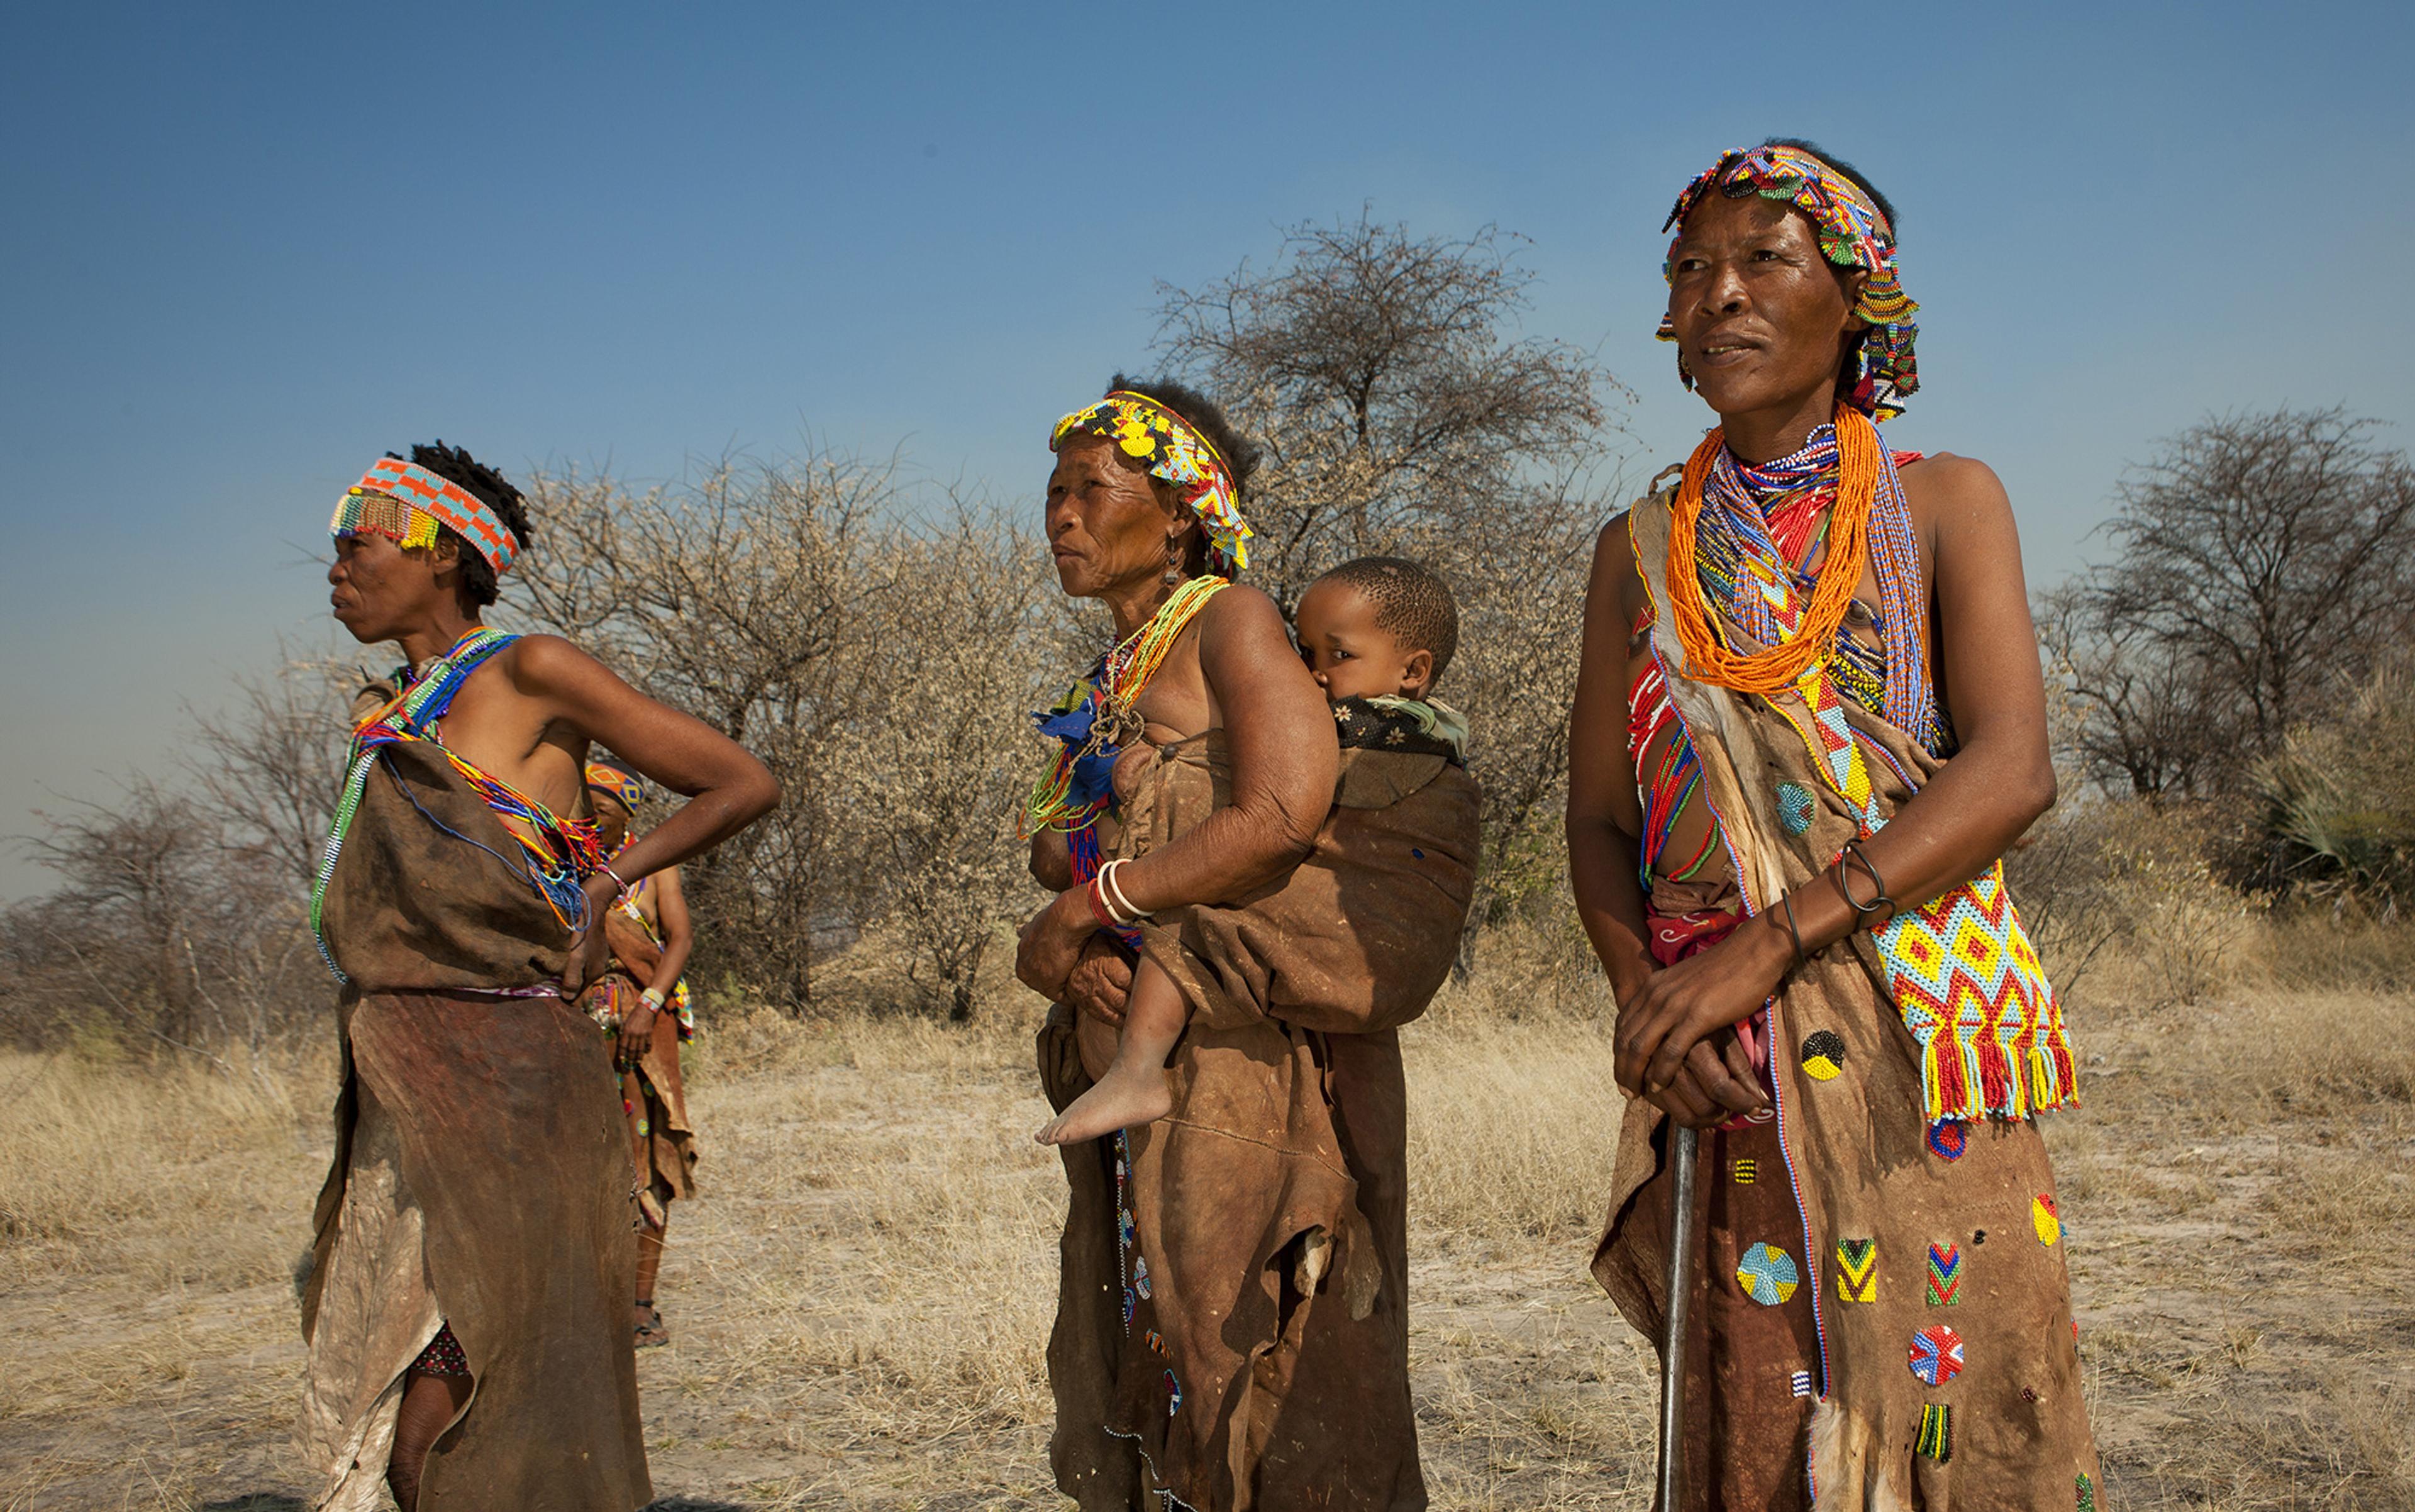 Three women in traditional attire stand outdoors in a dry landscape. One person carries a child on their back while another holds a walking stick.